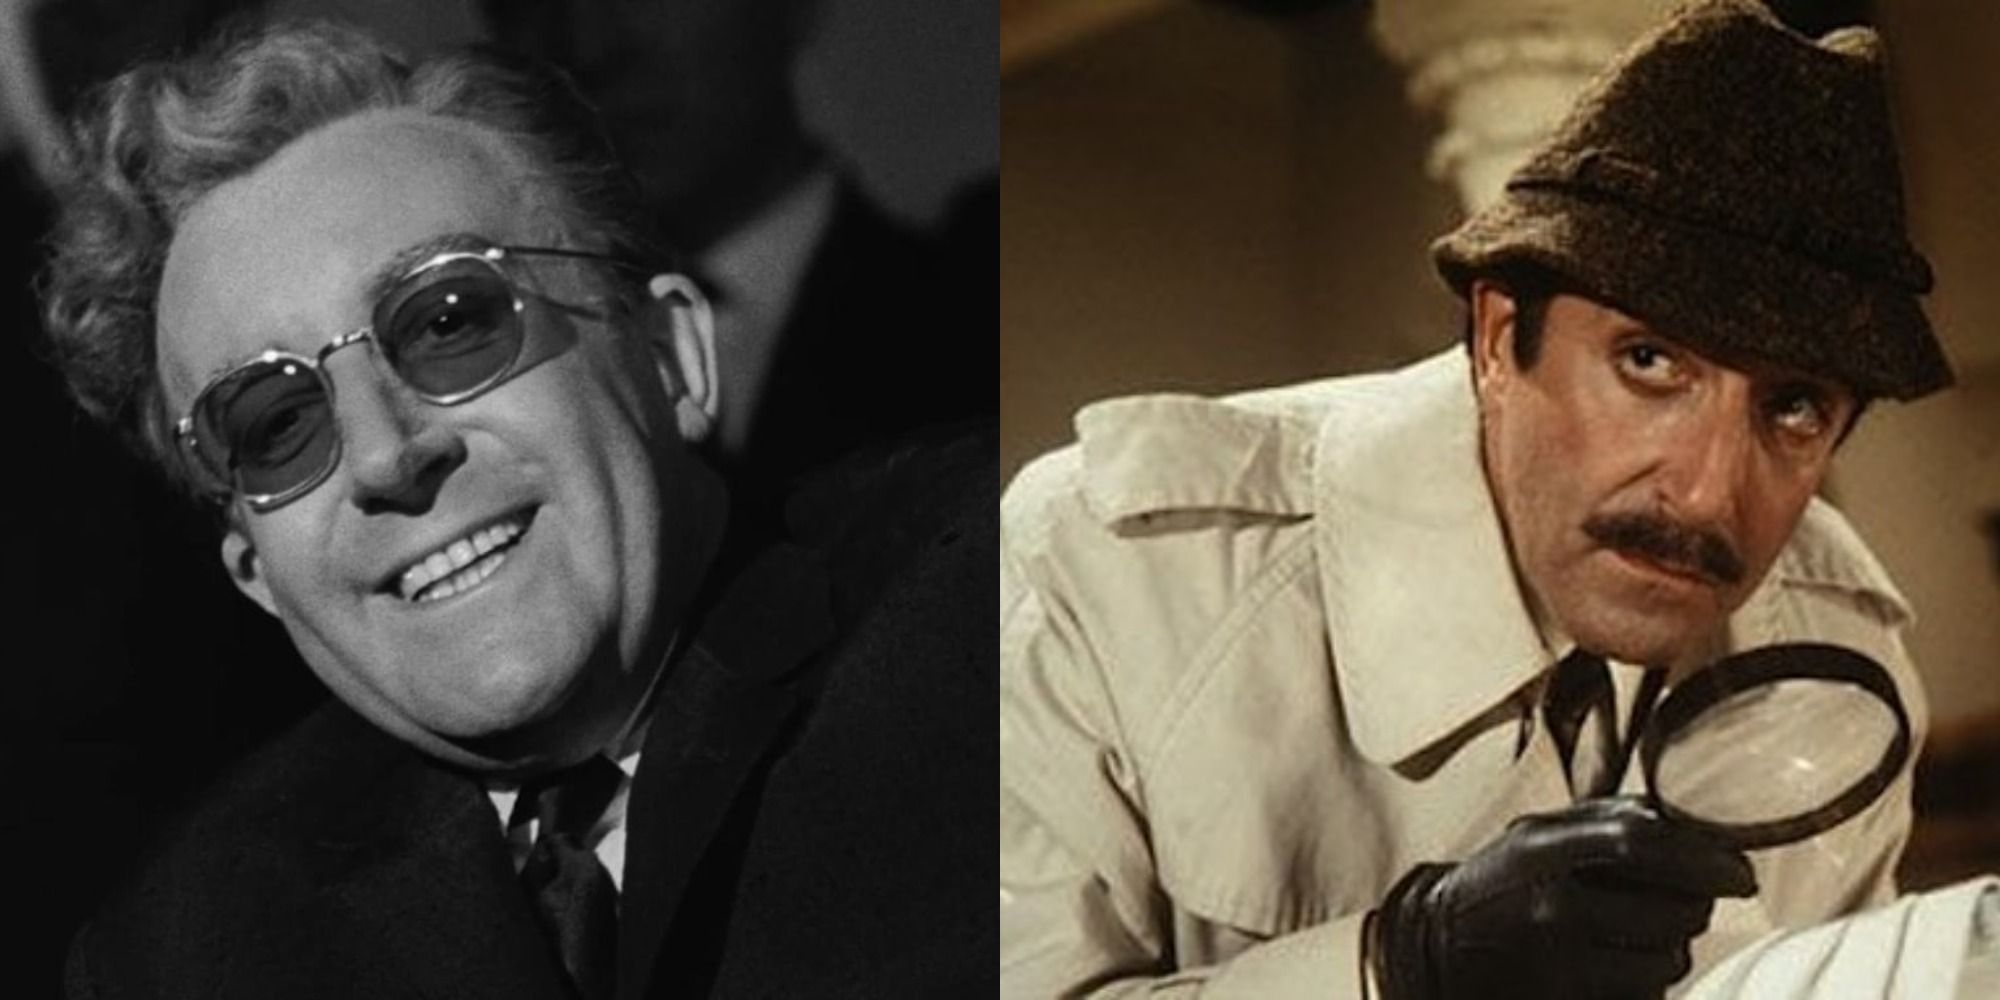 Split image depicting two iconic Peter Sellers roles, Sr Strangelove and The Pink Panther